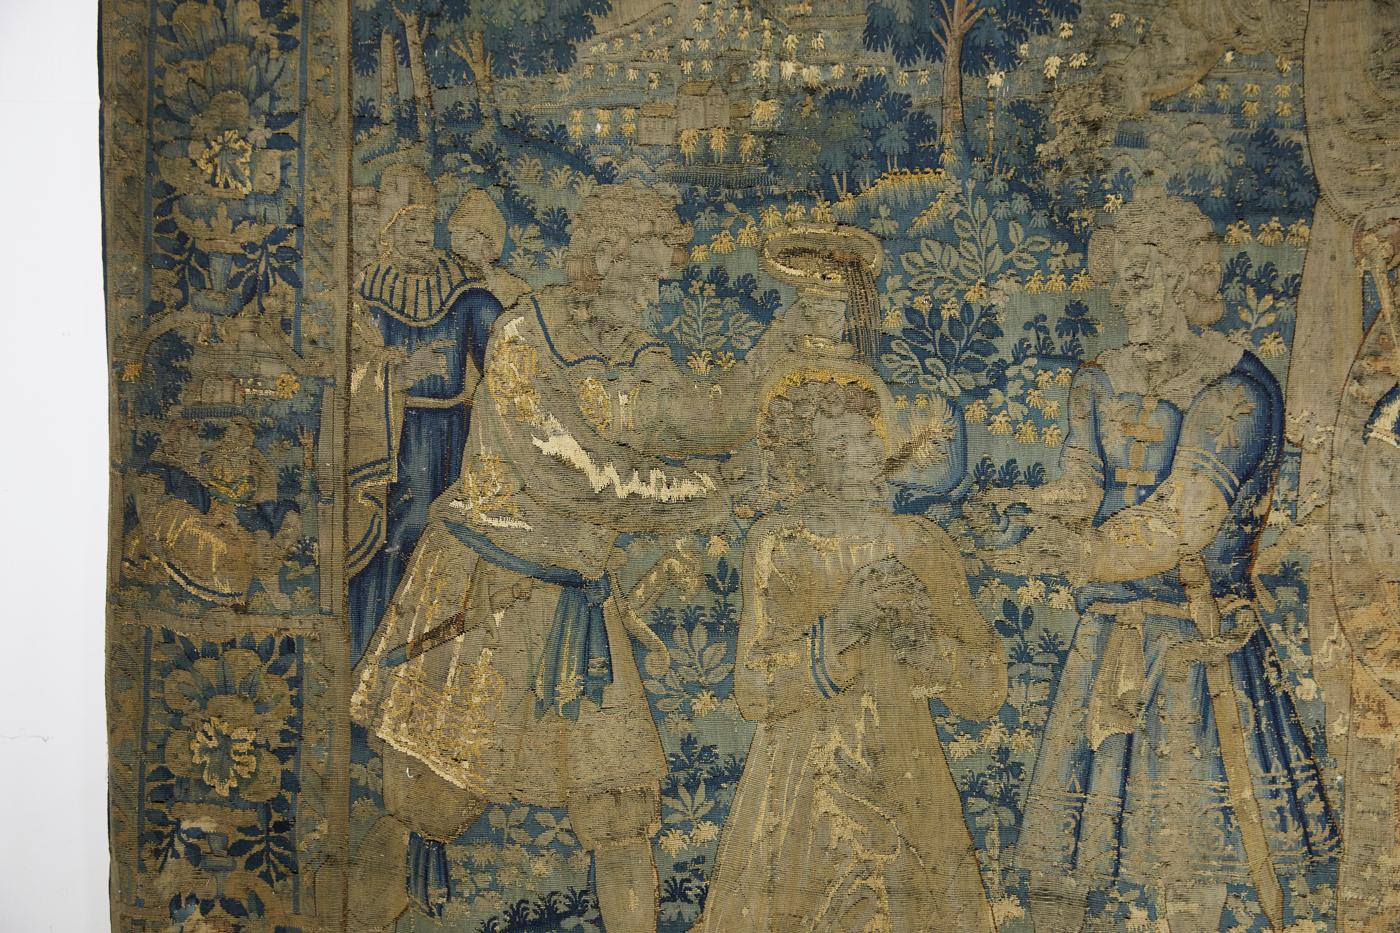 Hand-Woven Large 16th Century Flemish Tapestry